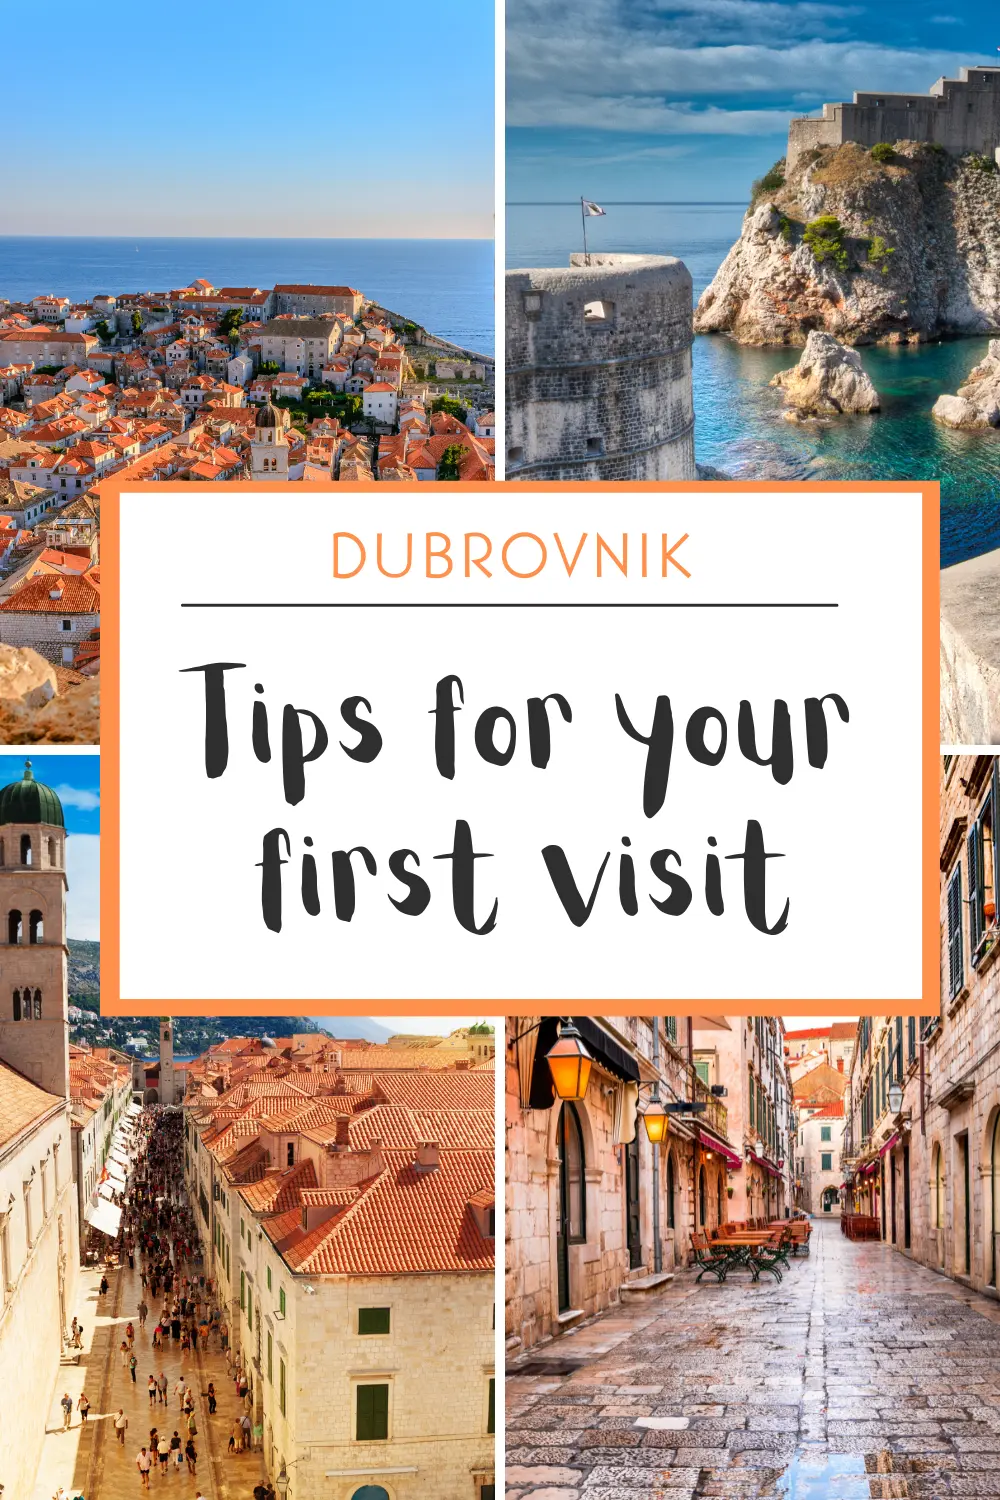 Tips for your first visit to Dubrovnik